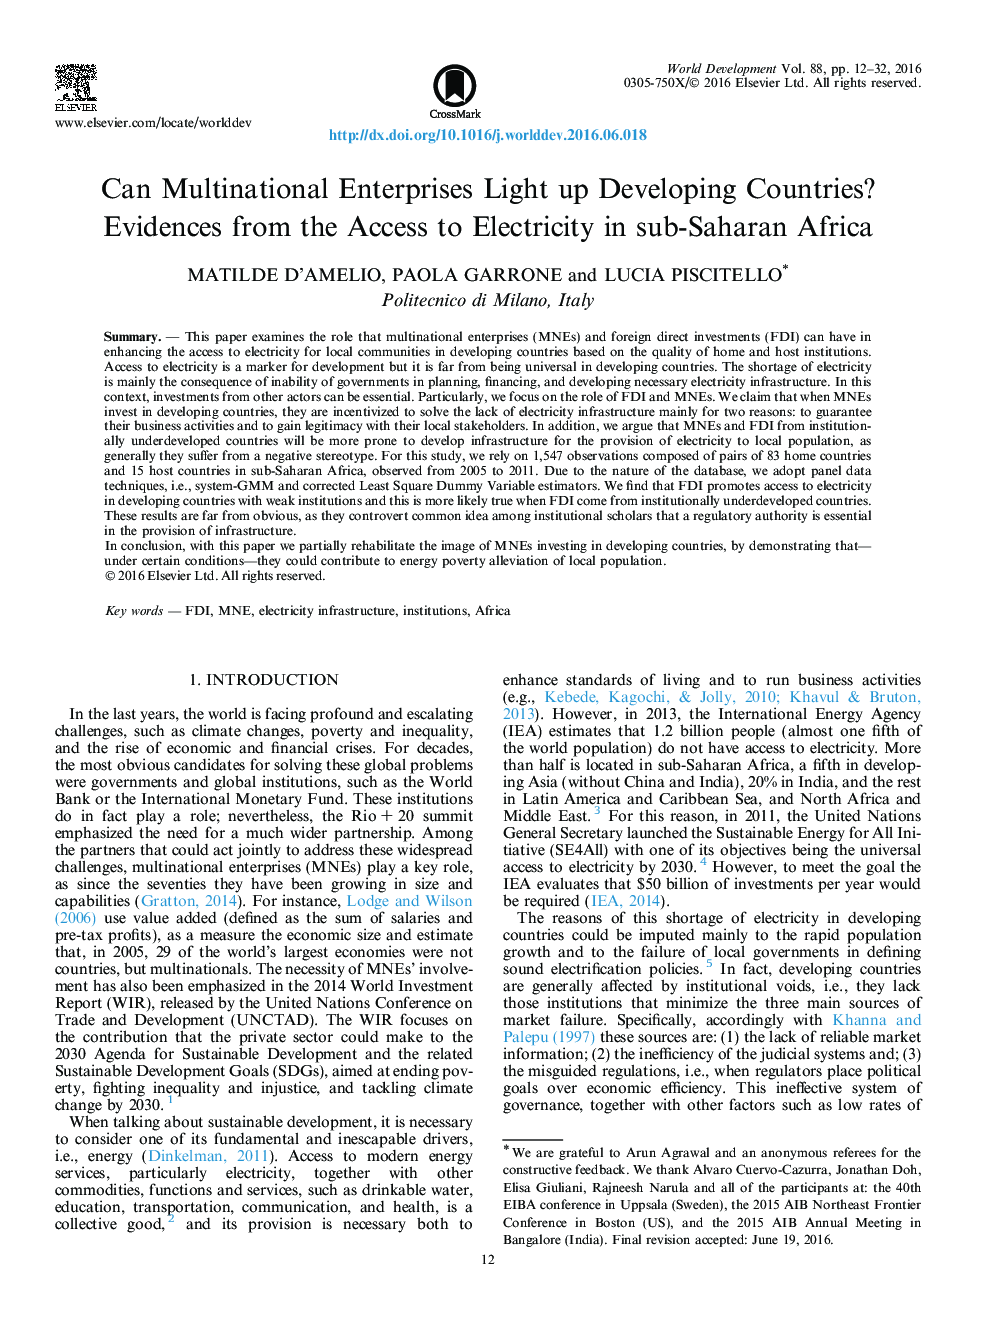 Can Multinational Enterprises Light up Developing Countries?: Evidences from the Access to Electricity in sub-Saharan Africa